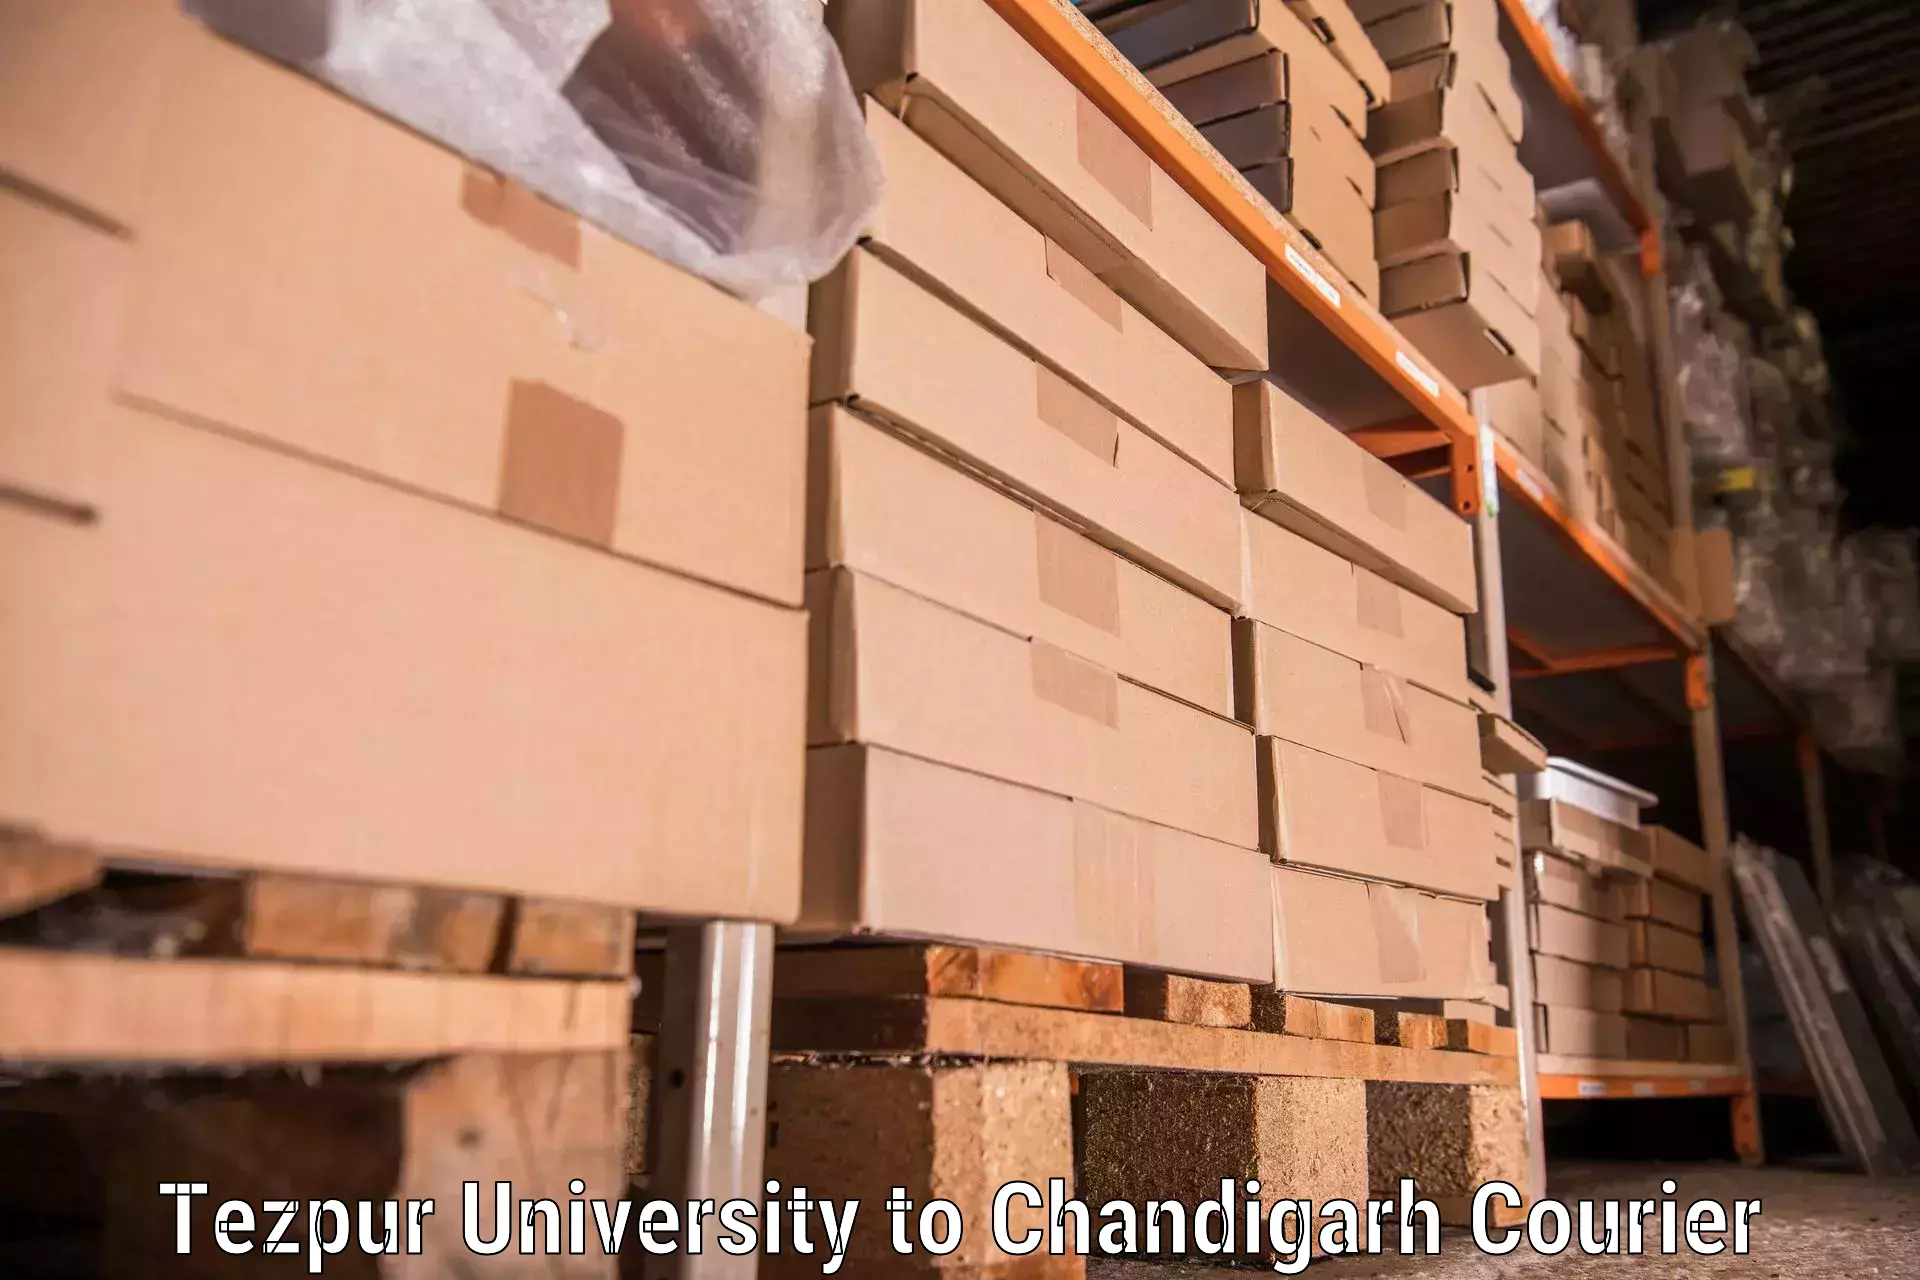 Quality relocation assistance Tezpur University to Chandigarh